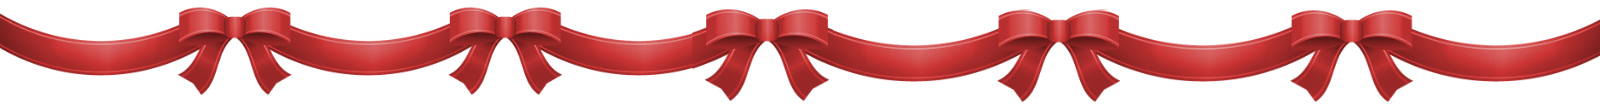 red ribbons and bows